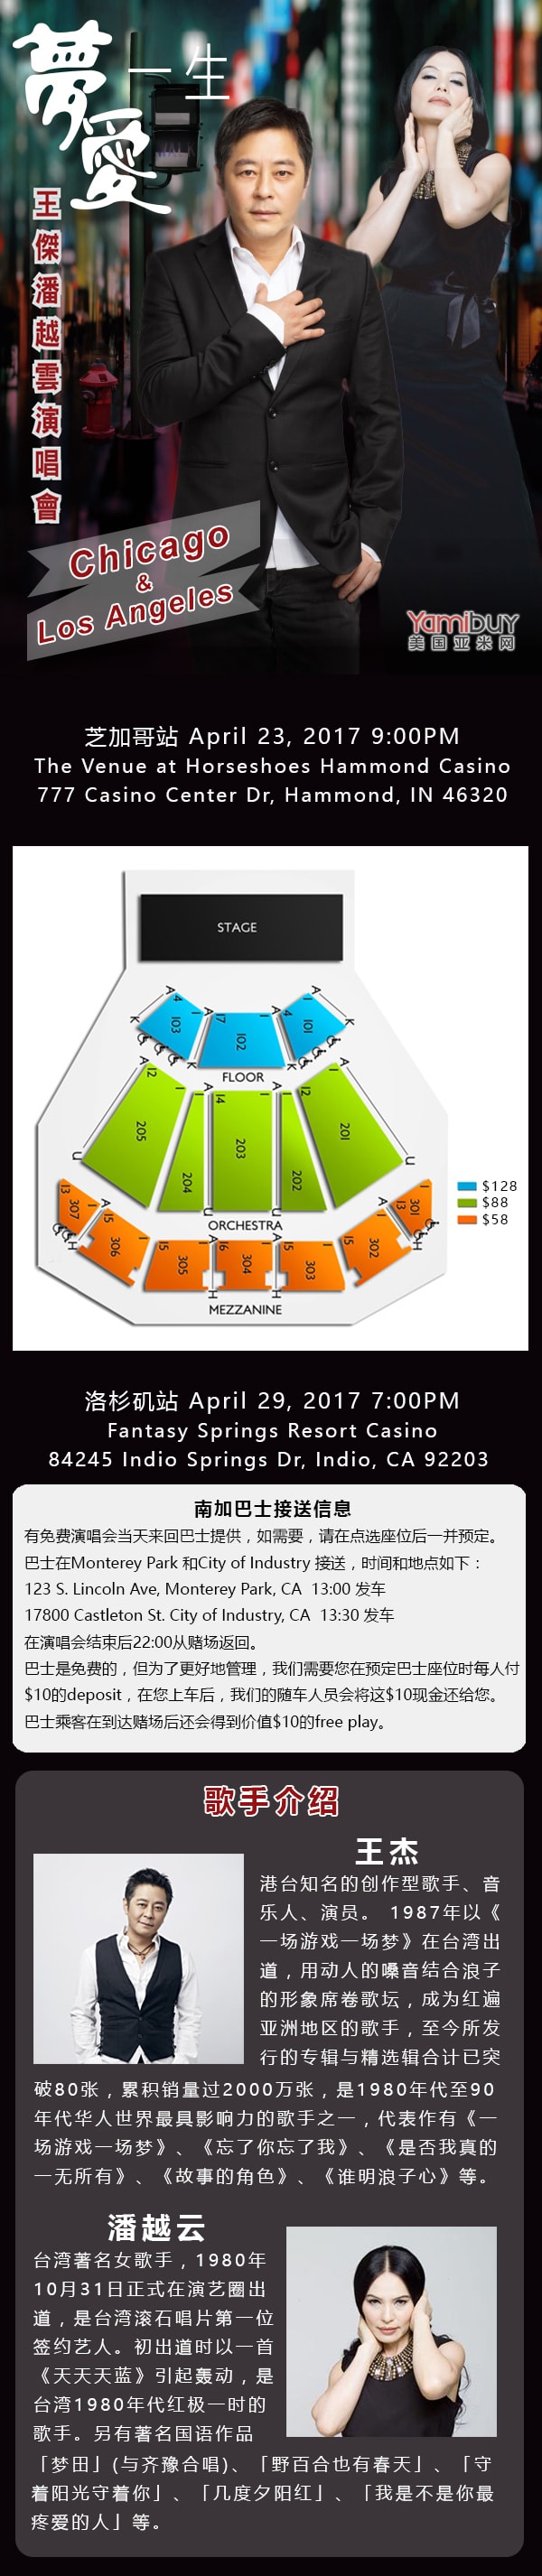 Dave Wang and Michelle Pan Concert  Apr.23th Hammond IN  $58